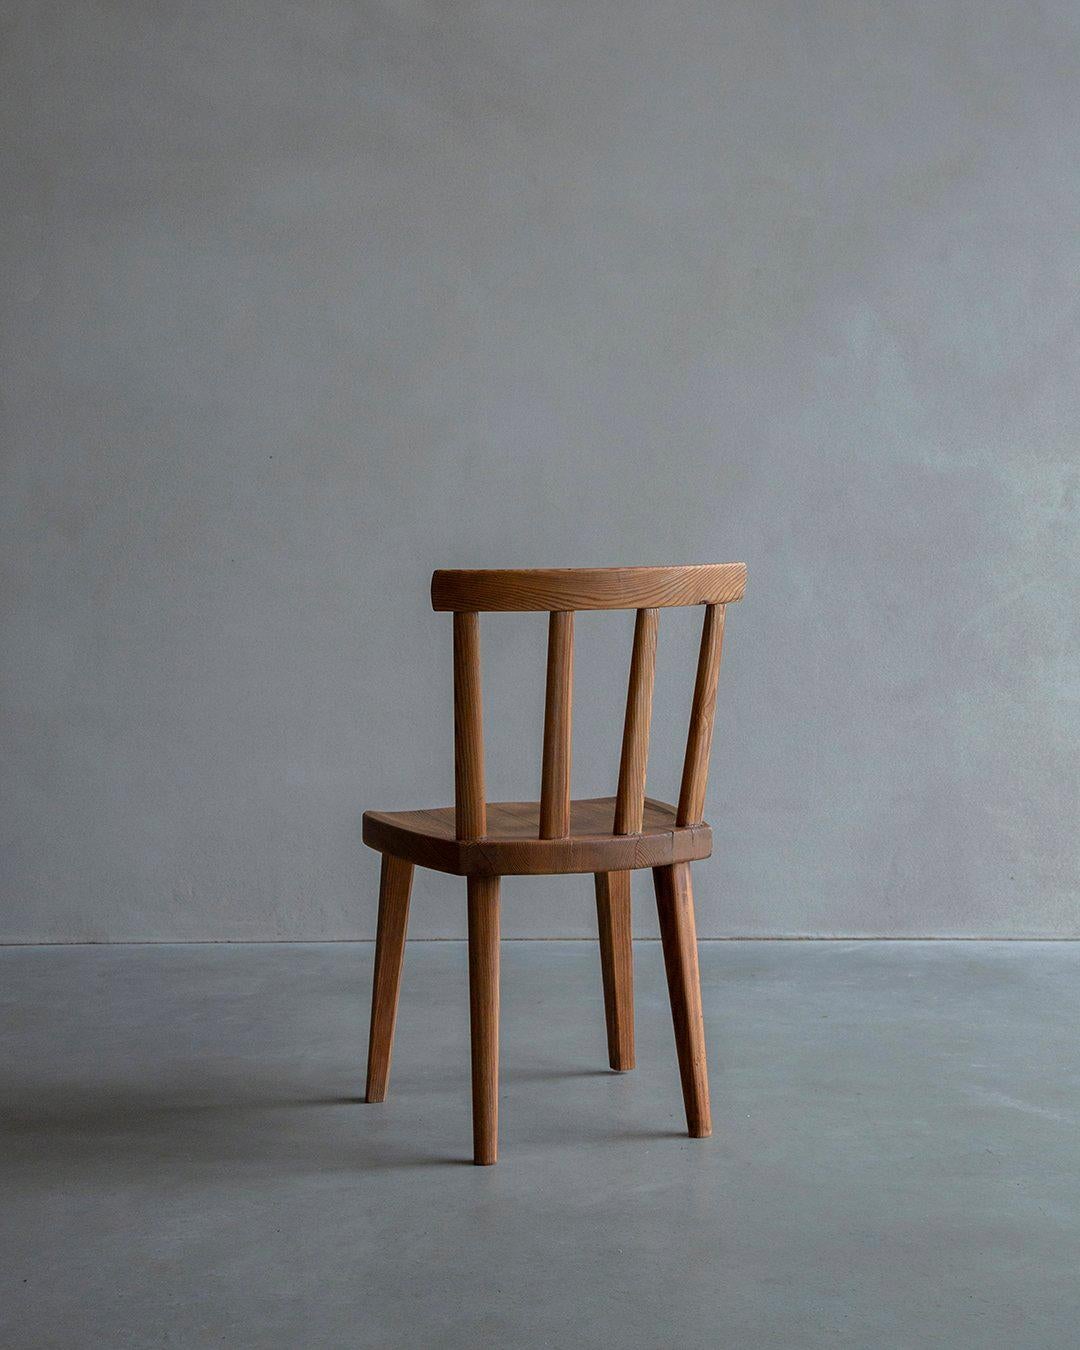 Hand-Crafted Axel Einar Hjorth - Utö Dining Chair - produced by Nordiska Kompaniet in Sweden For Sale